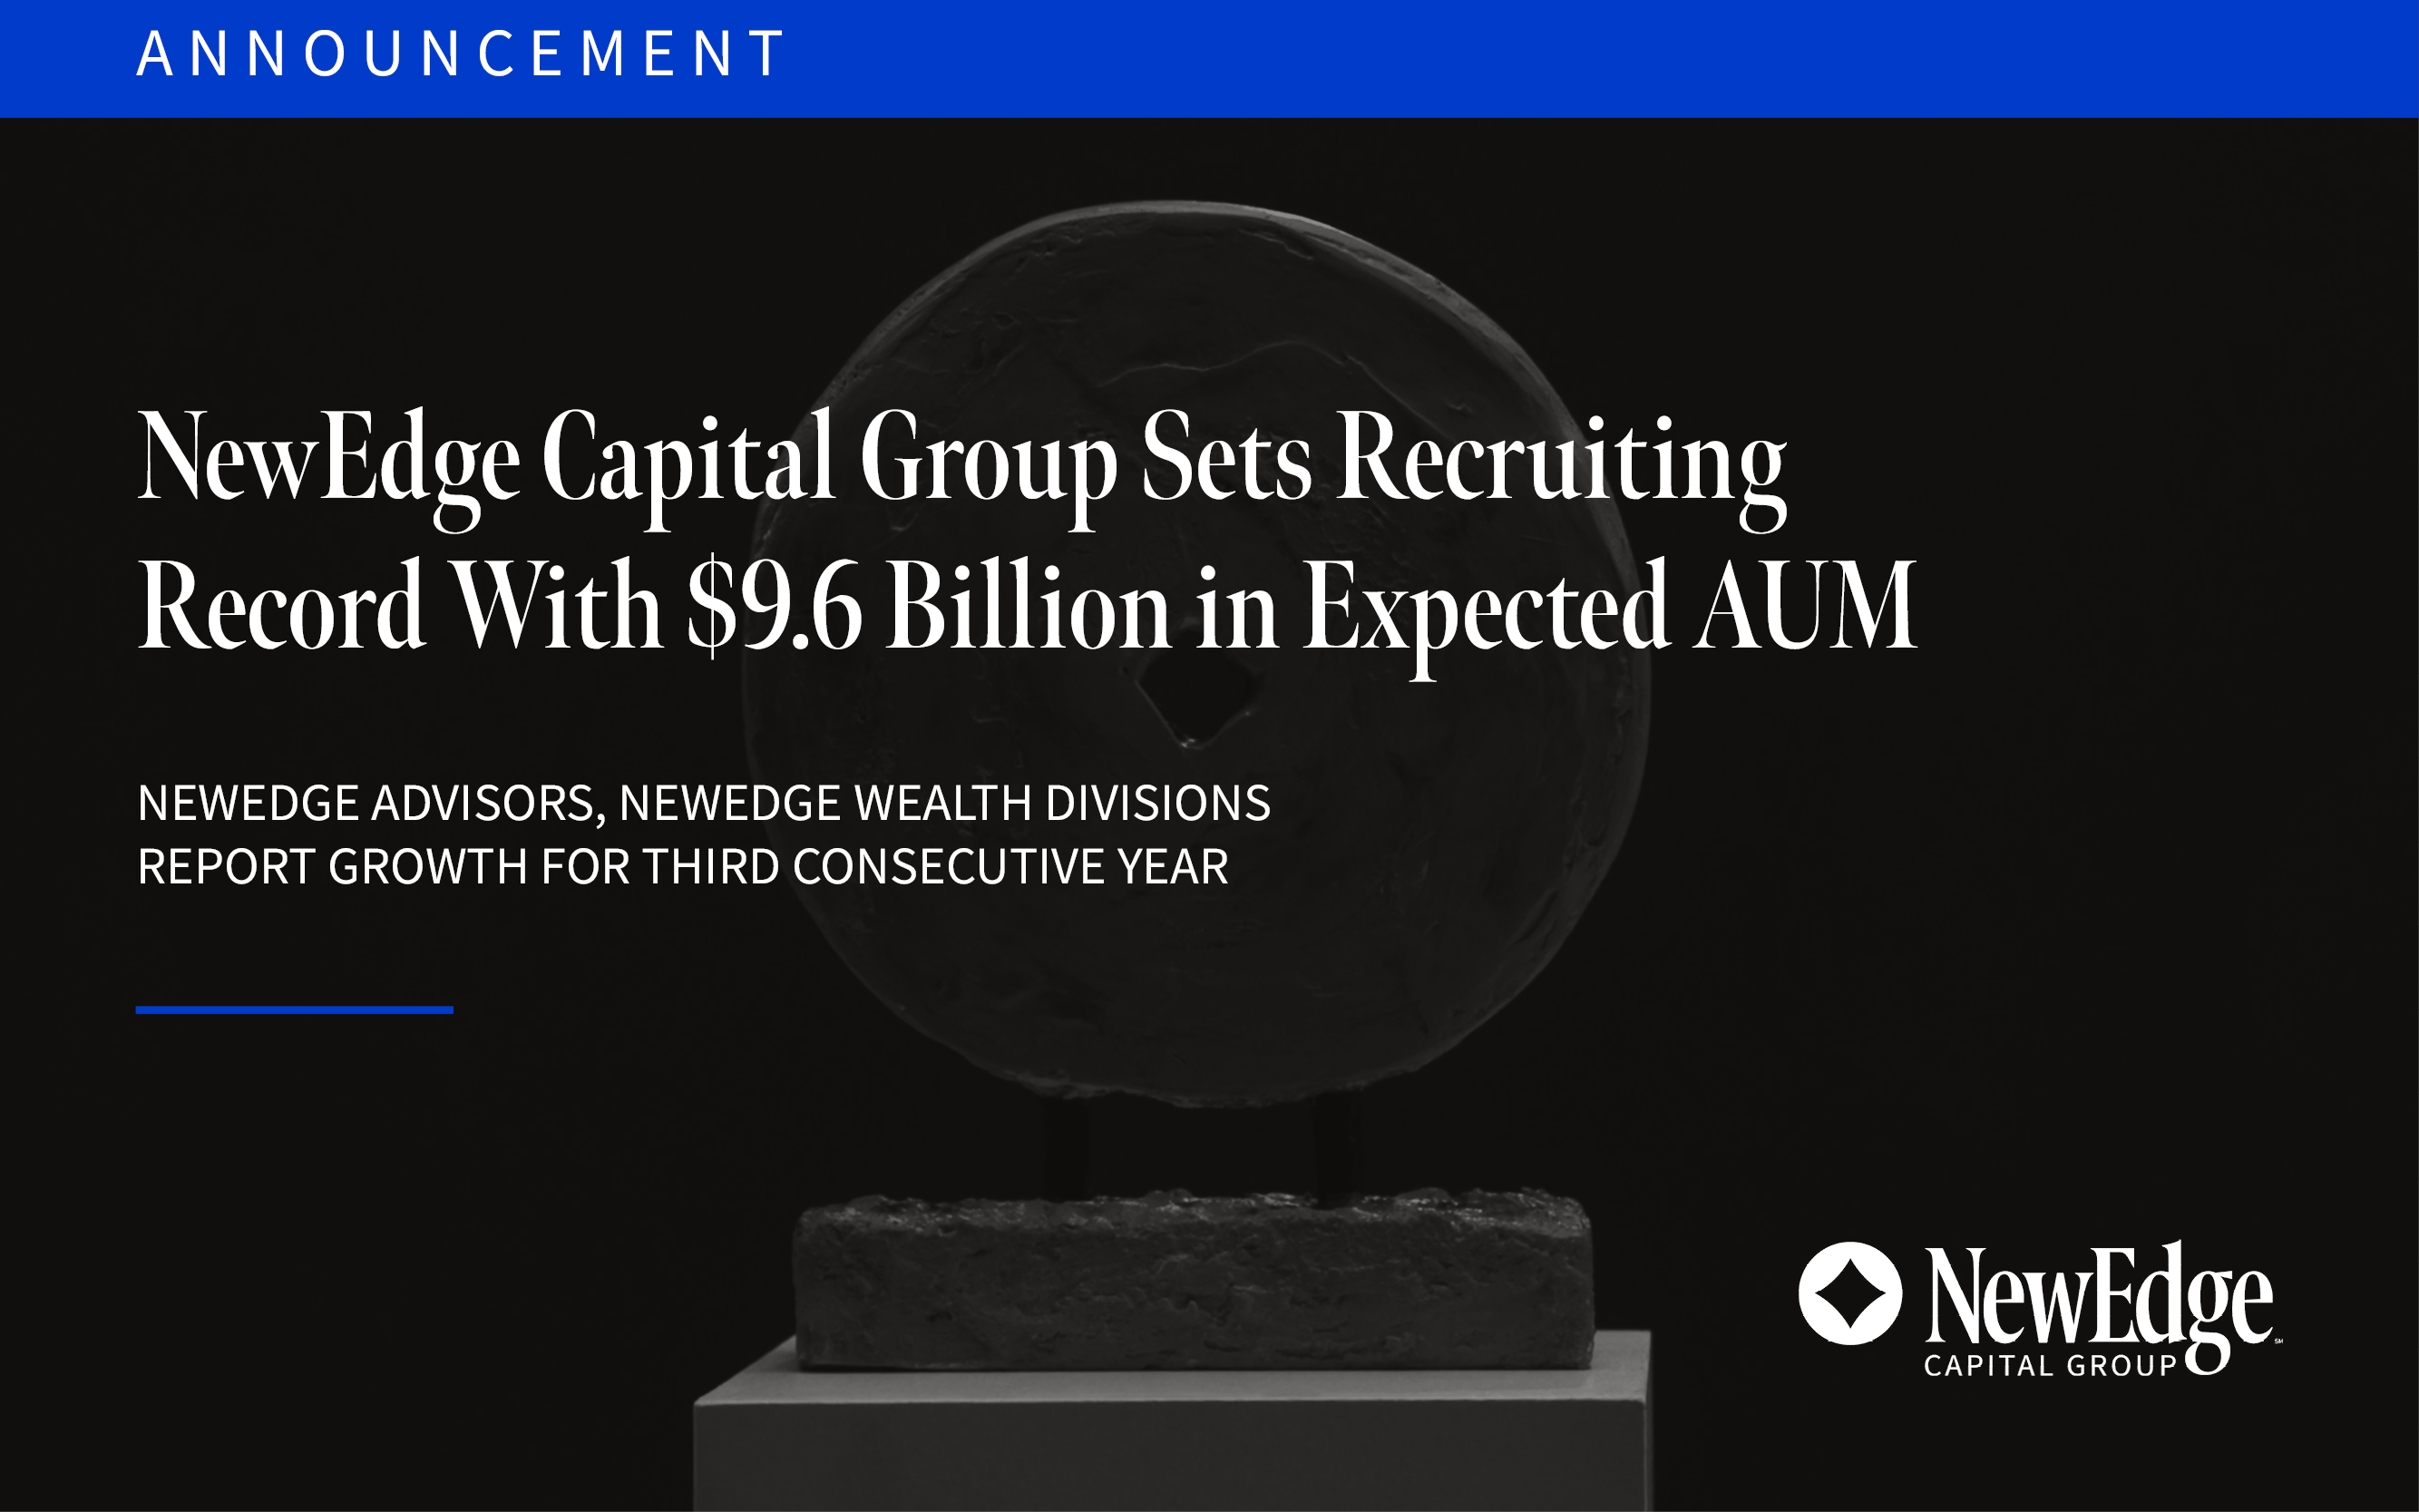 NewEdge Capital Group Sets Recruiting Record With $9.6 Billion in Expected AUM